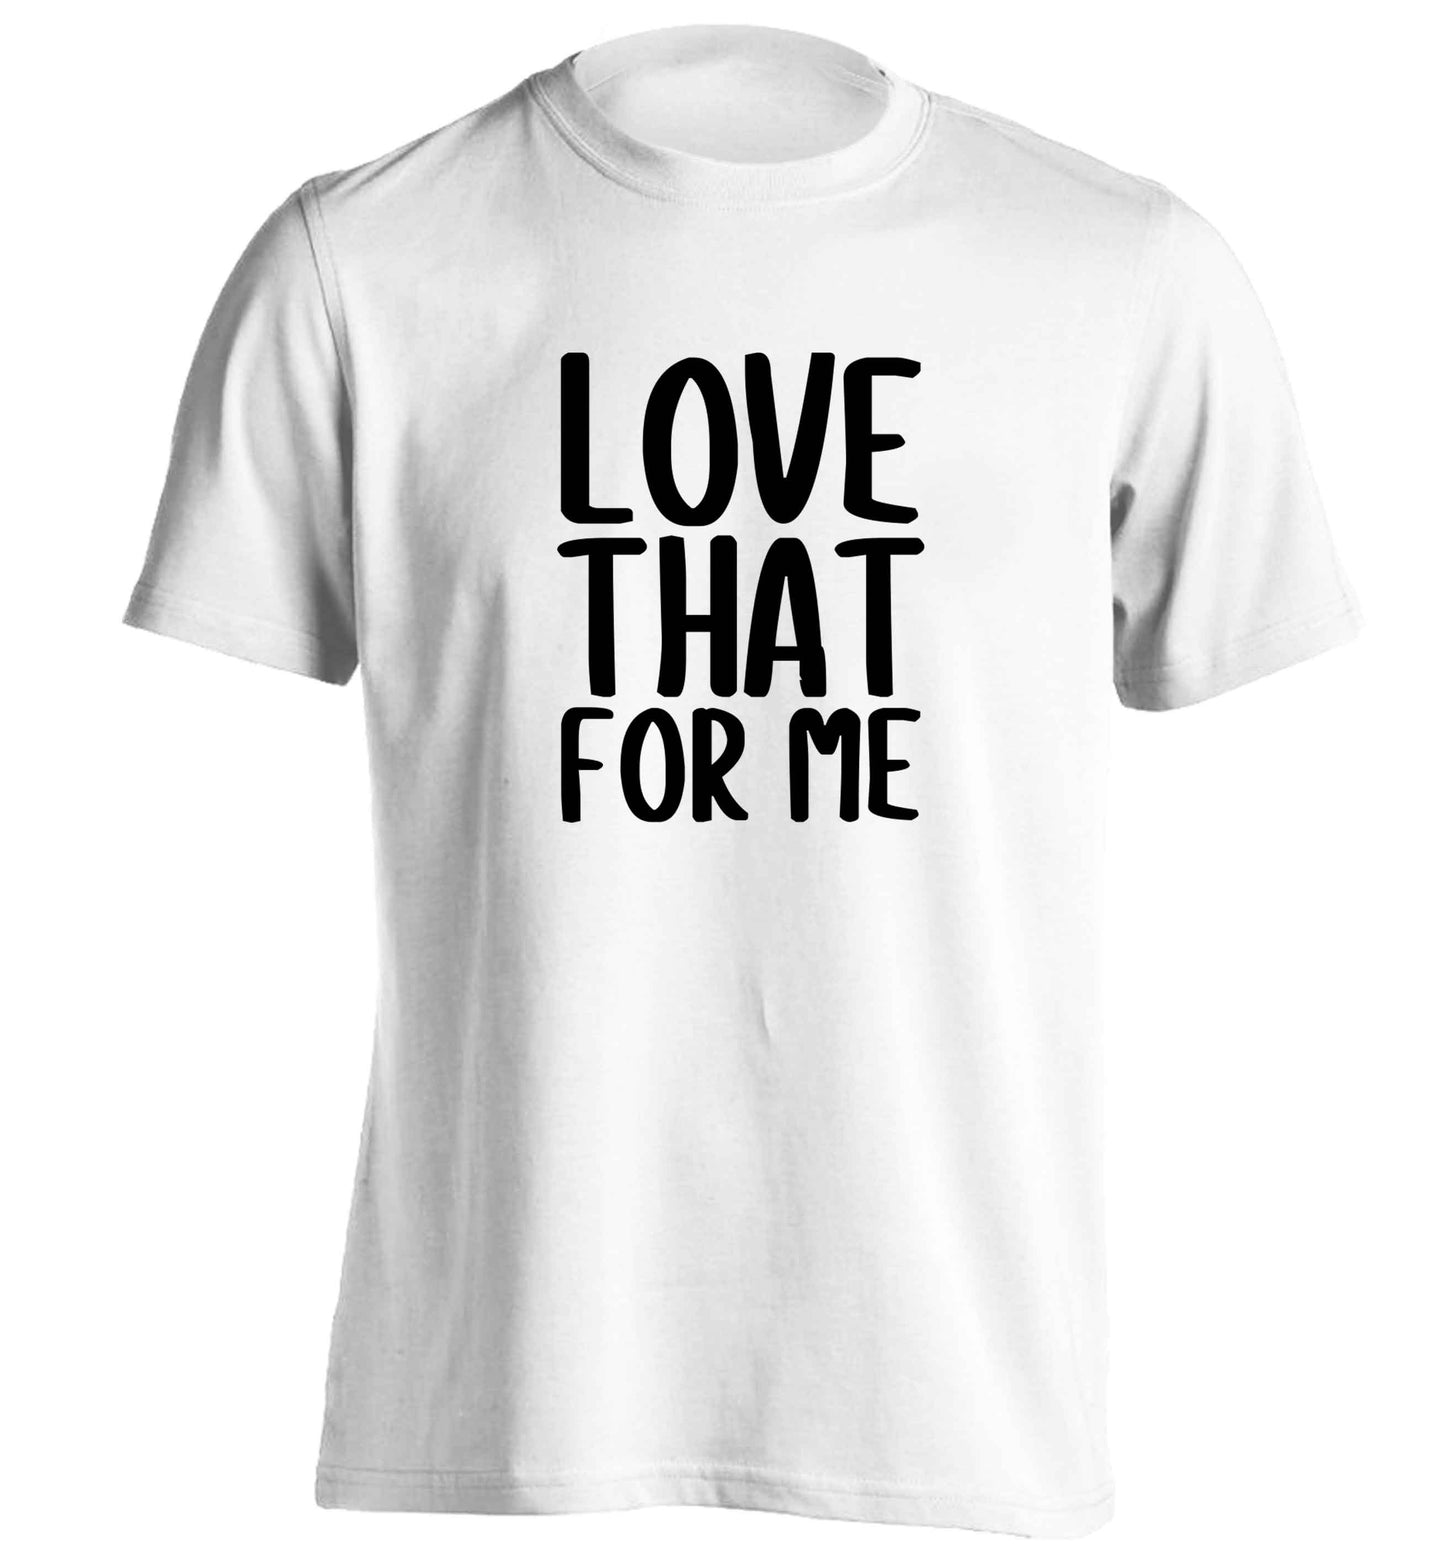 We love this for YOU! Who else loves saying this?!  adults unisex white Tshirt 2XL